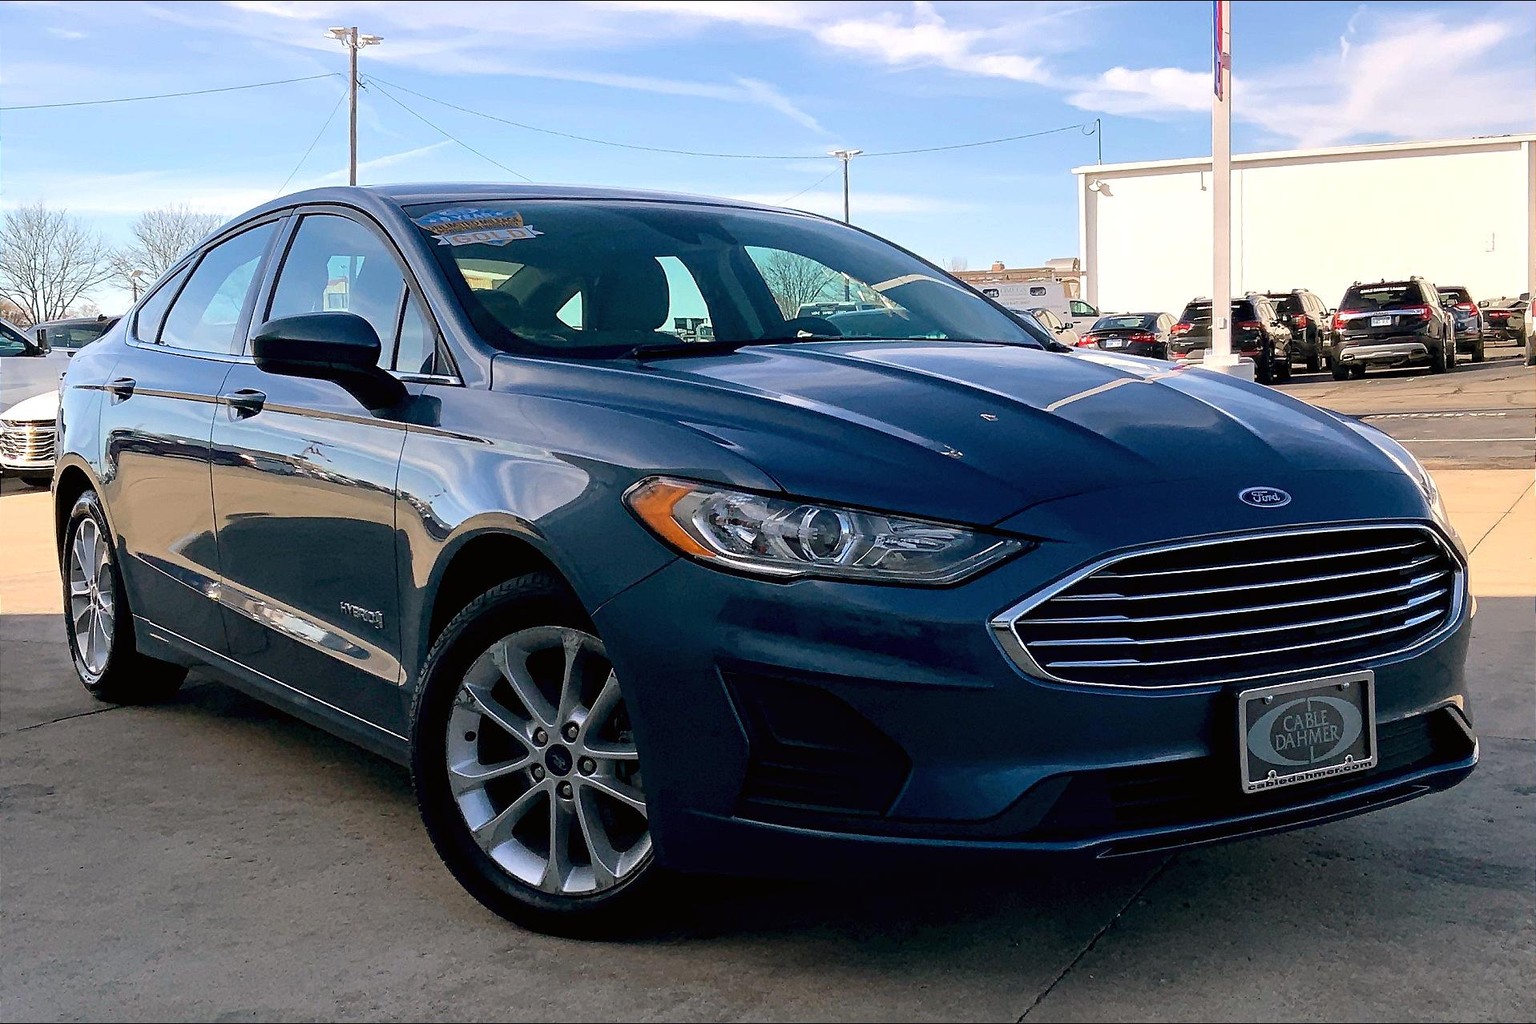 Top 10 Affordable Hybrid Cars for Every Budget - Ford Fusion Hybrid Specs and features